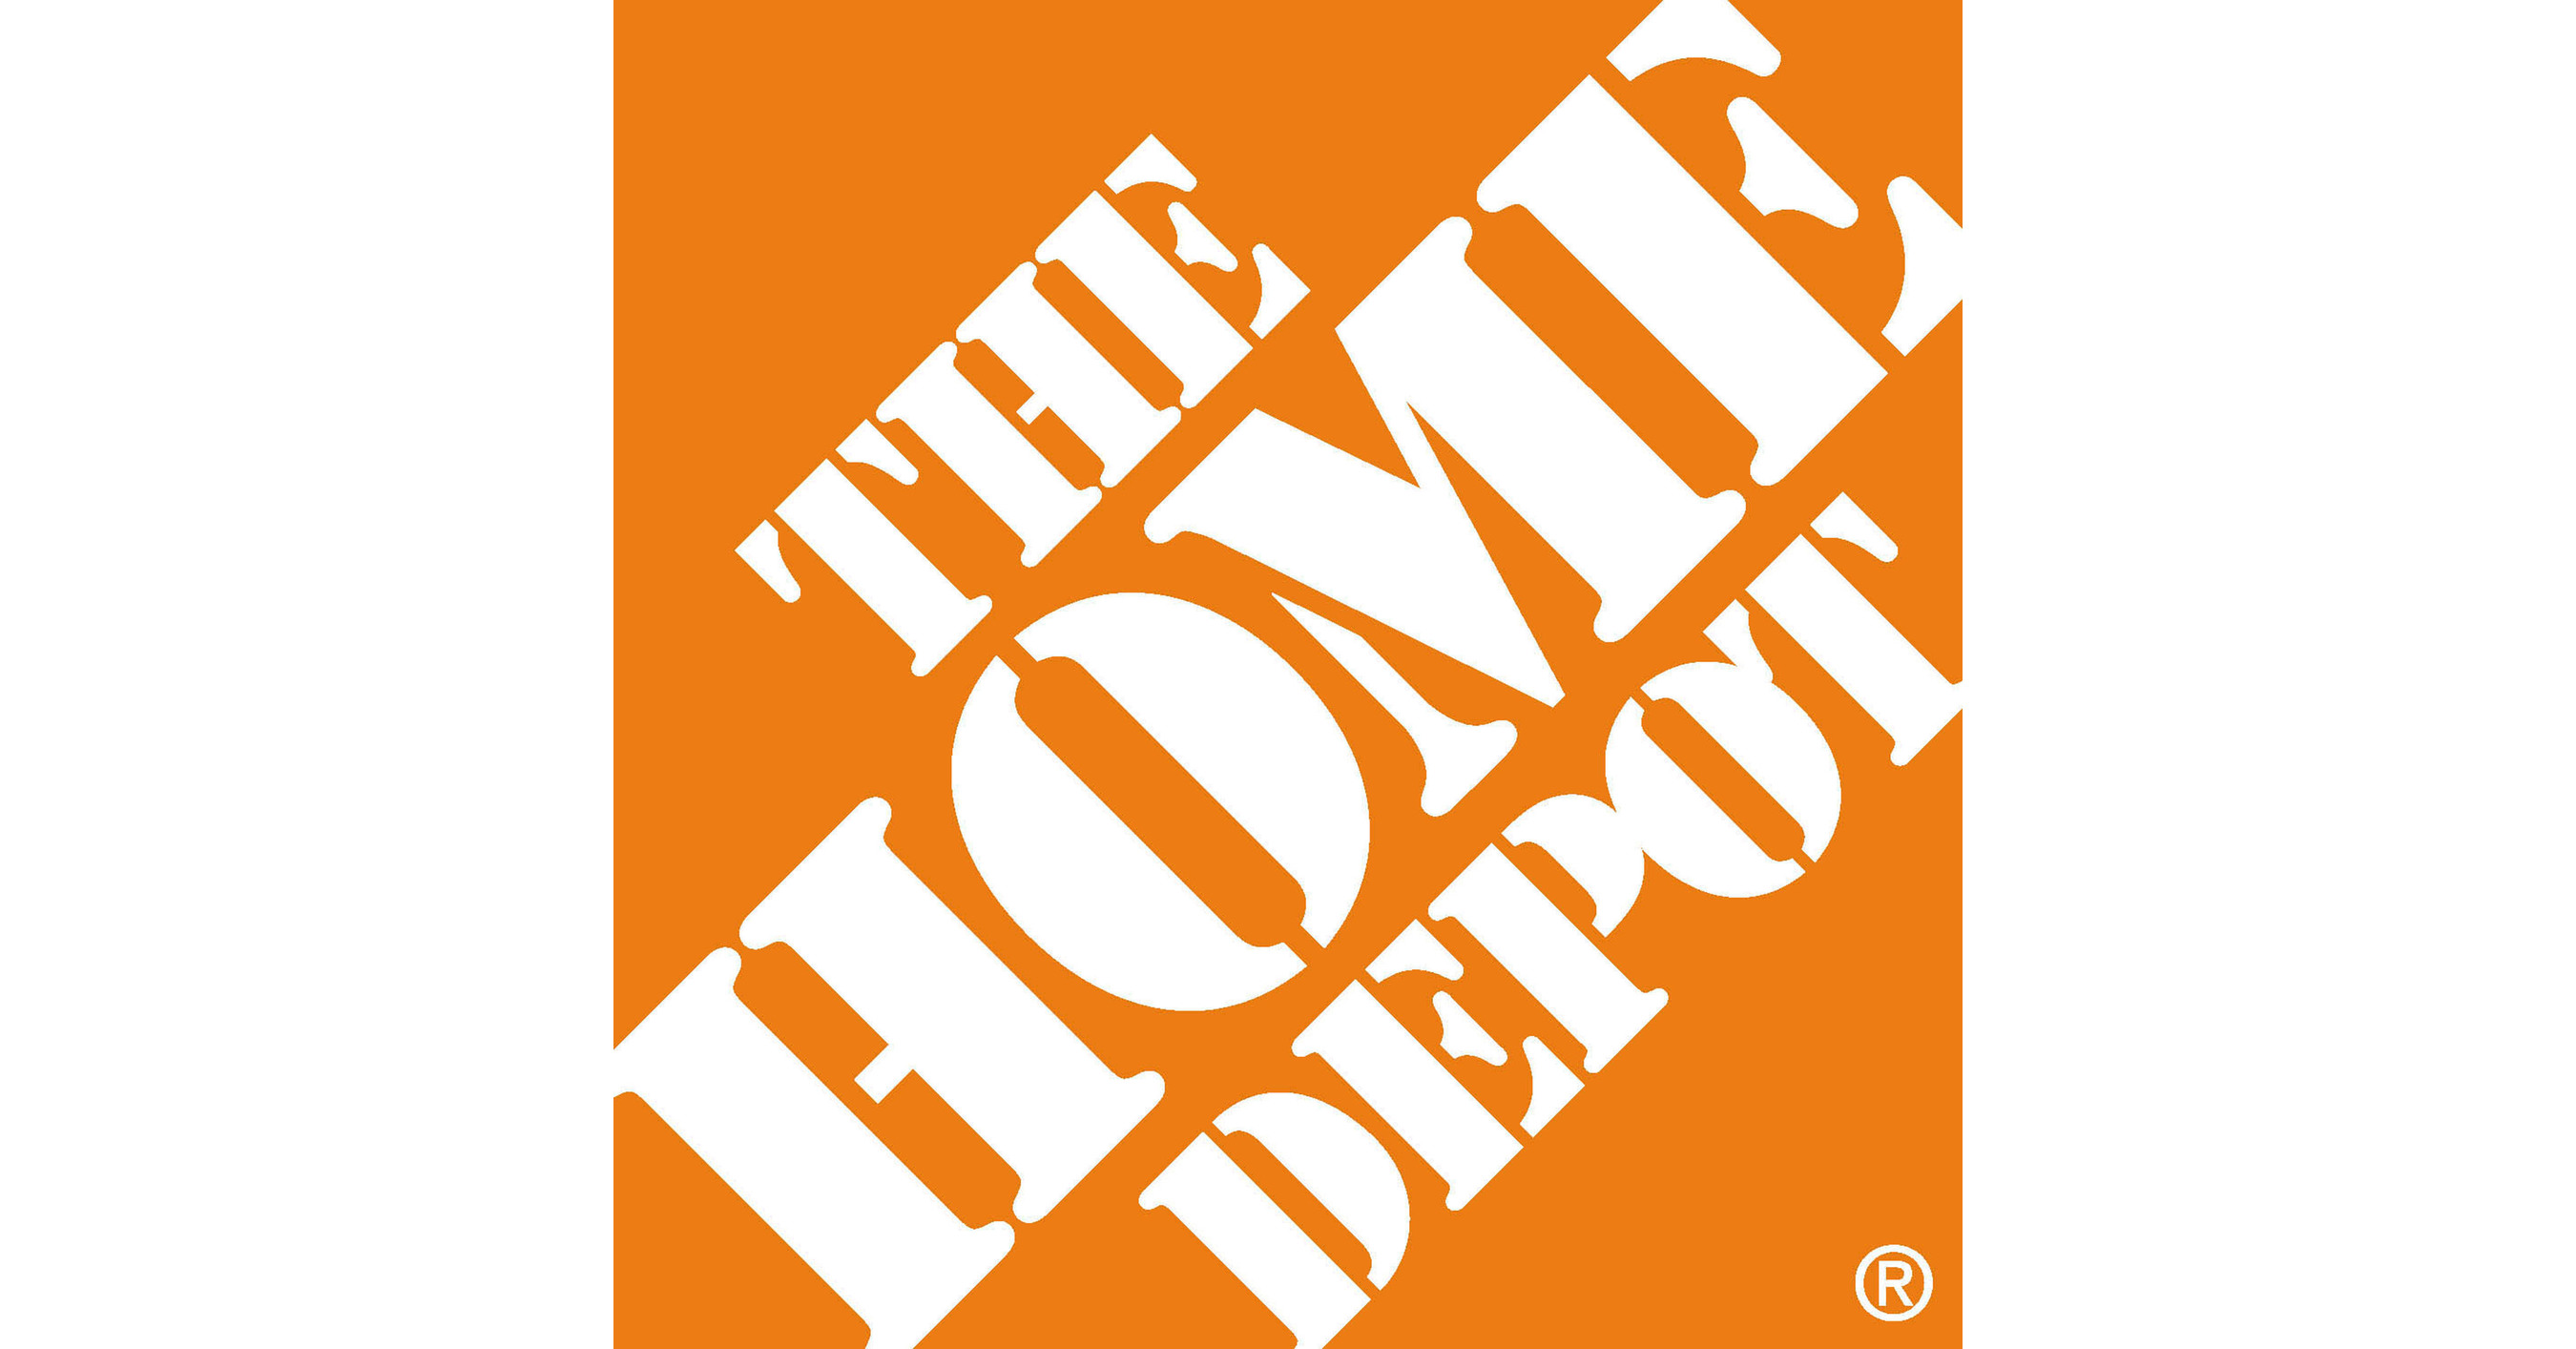 The Home Depot Announces 0 Million Venture Capital Fund to Fuel Innovation in Retail and Home Improvement